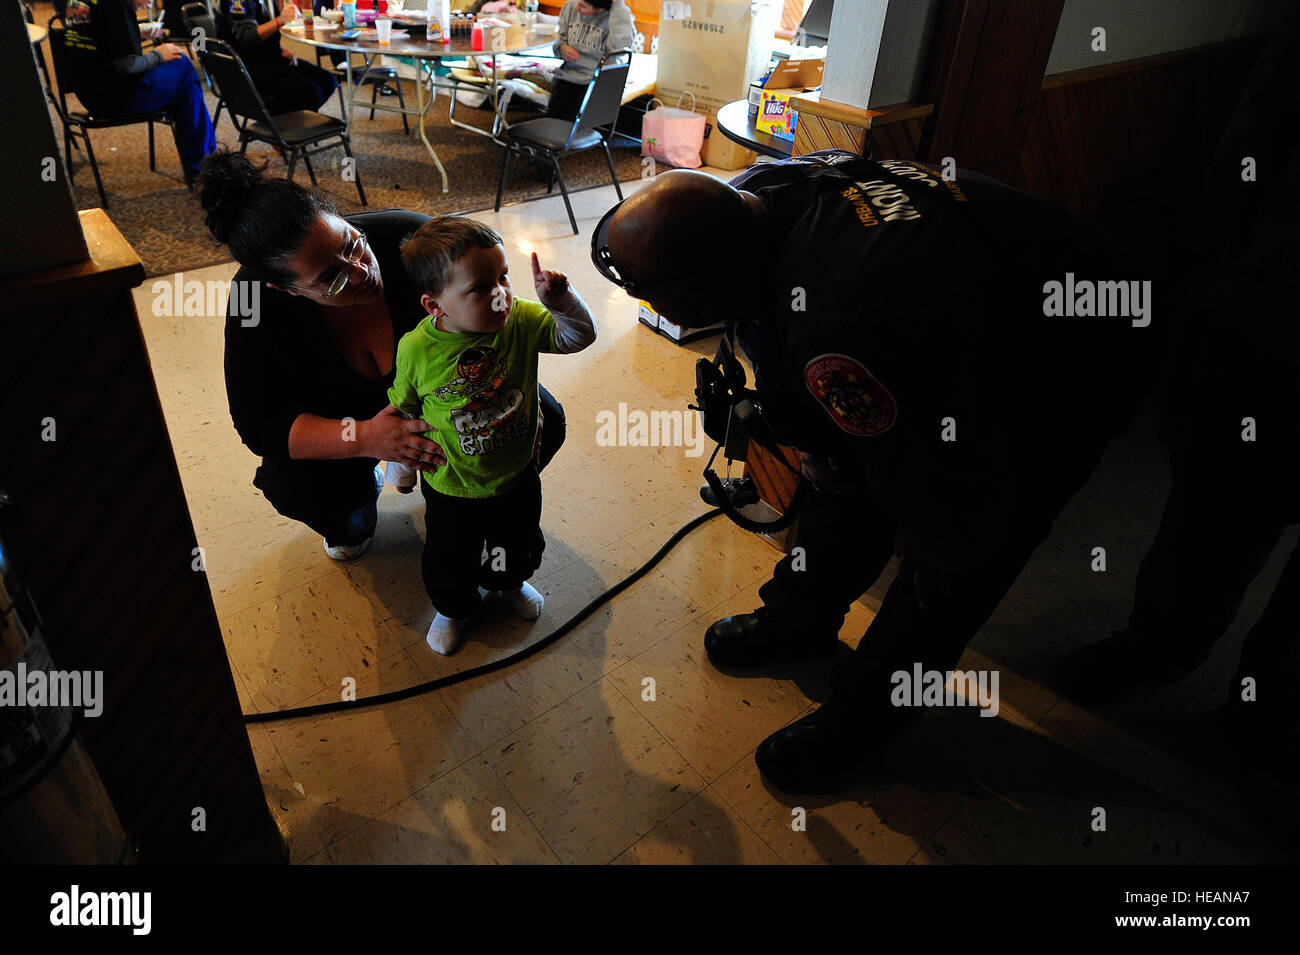 Rich Tatum, a rescue specialist with the Maryland Task Force One urban search and rescue team, asks a little boy how old he is at a firehouse in East Rockaway, N.Y., Nov. 4, 2012. Stock Photo